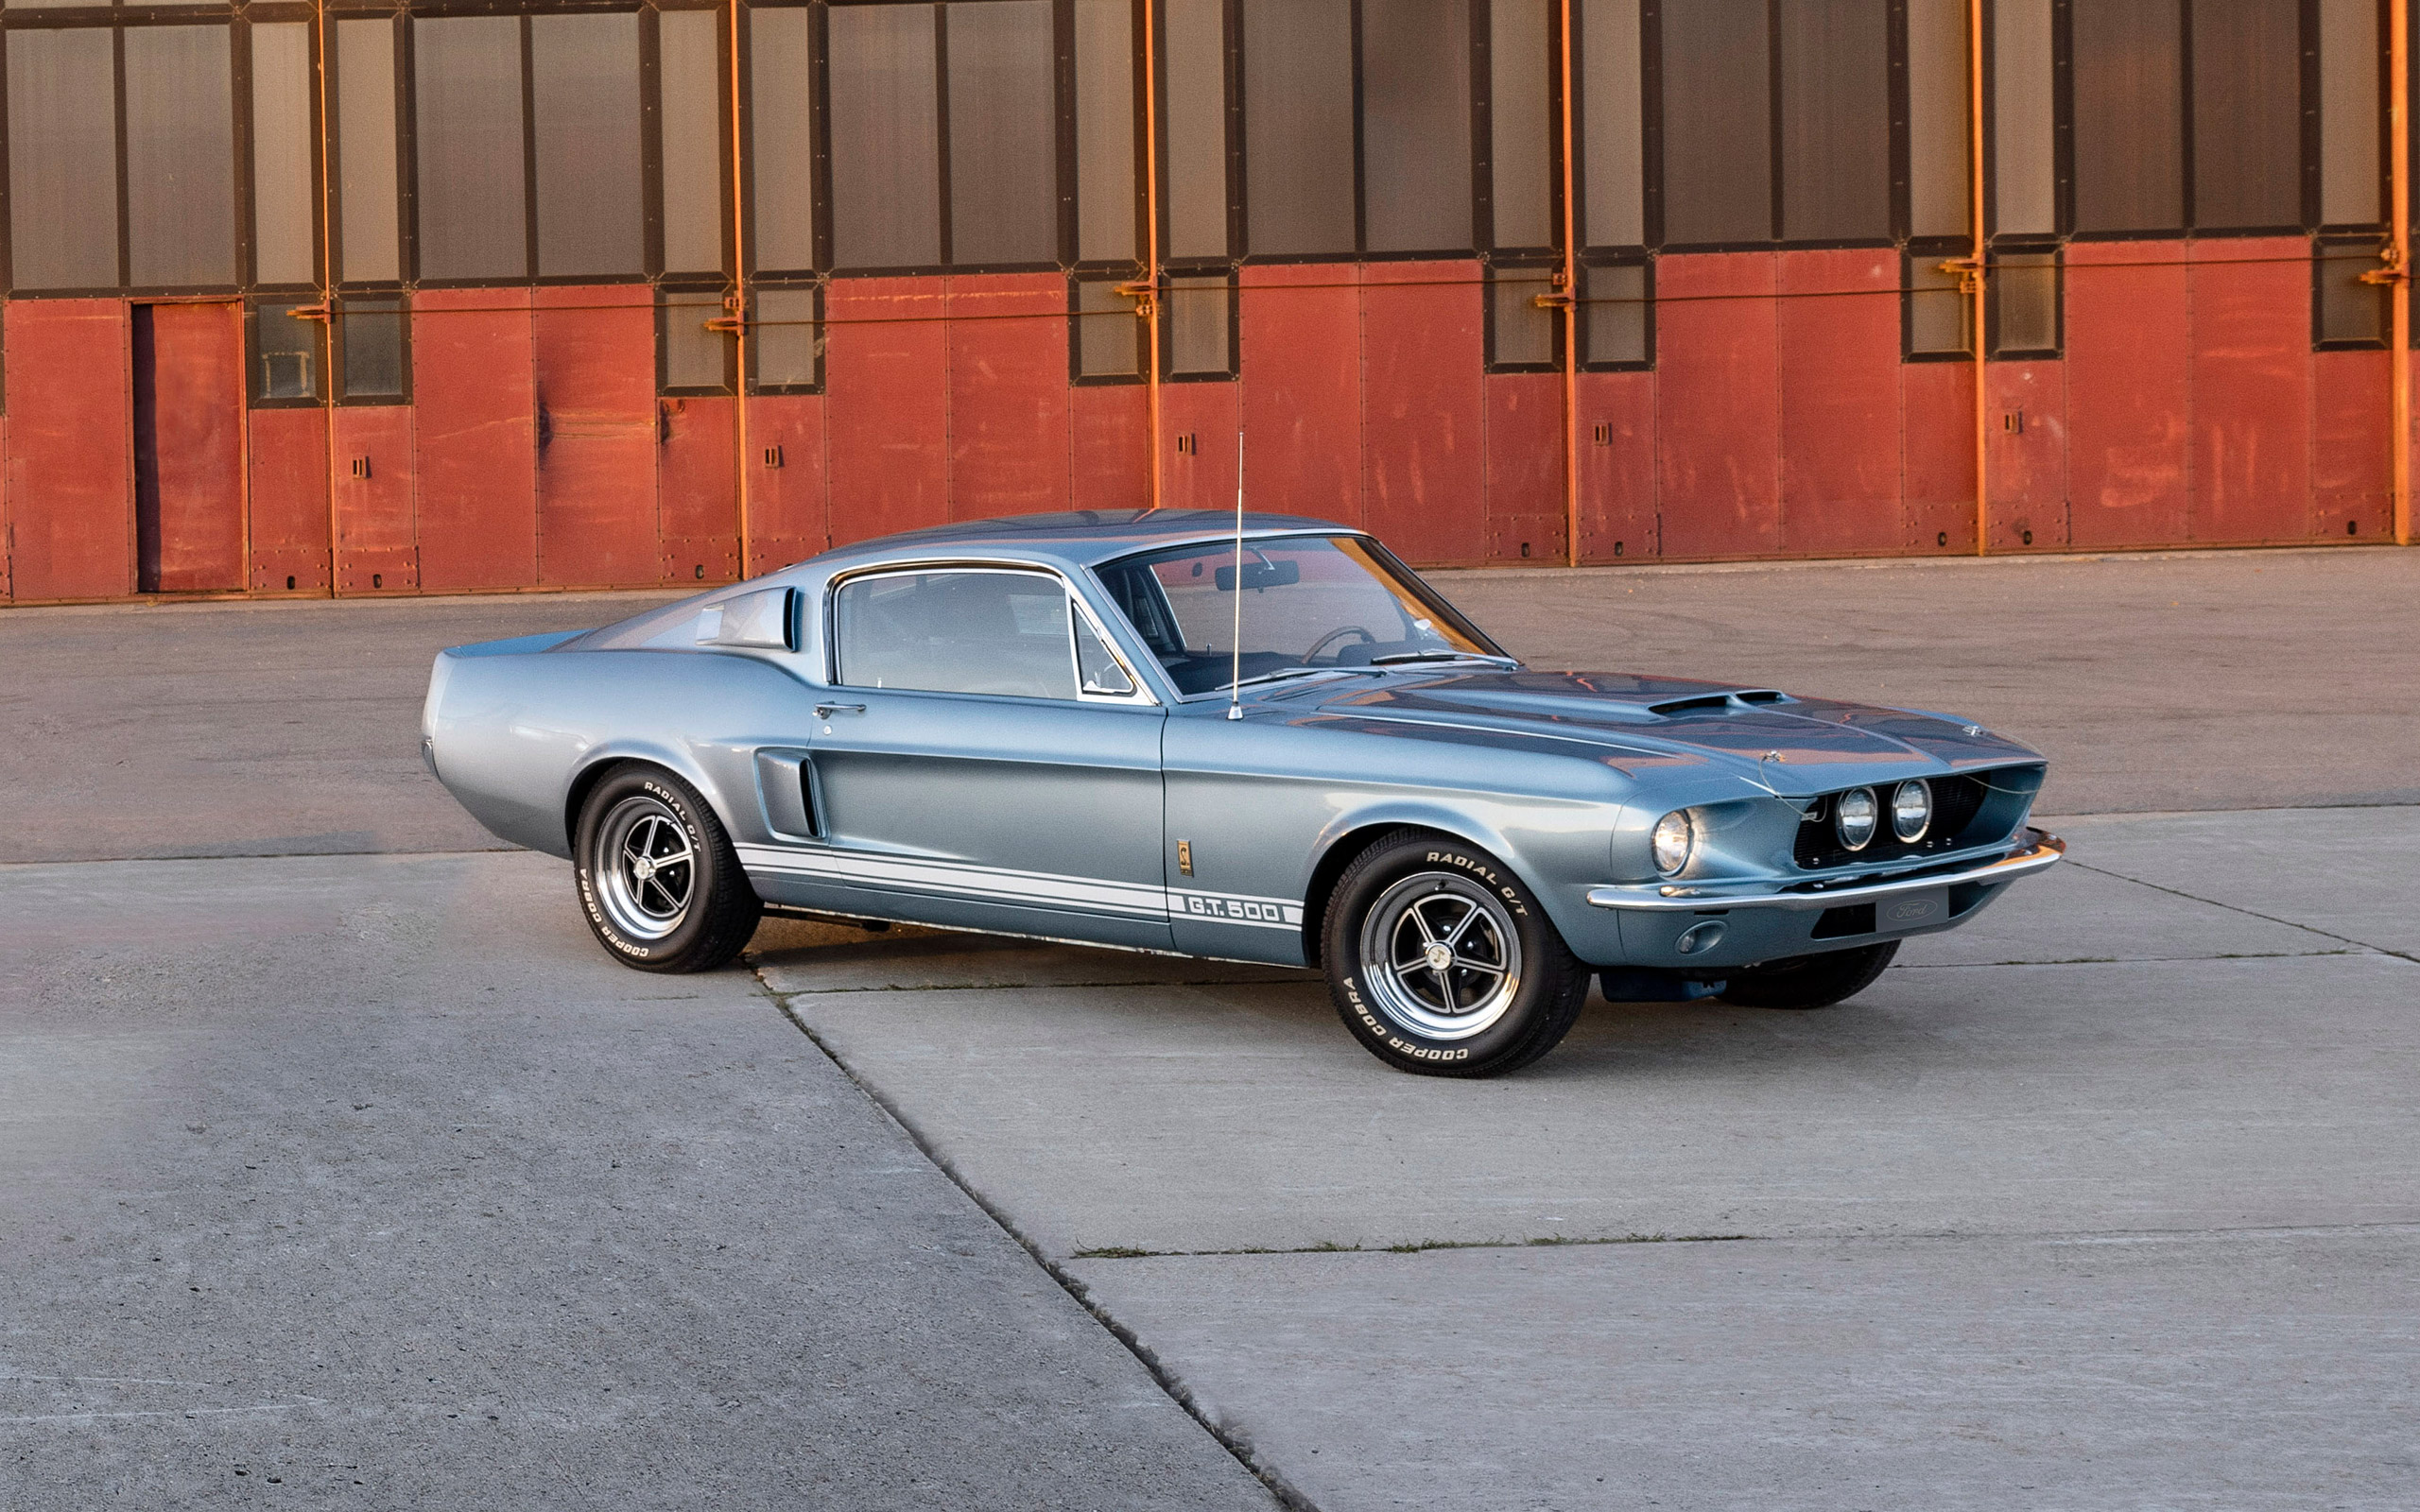  1967 Ford Shelby Mustang GT500 Wallpaper.